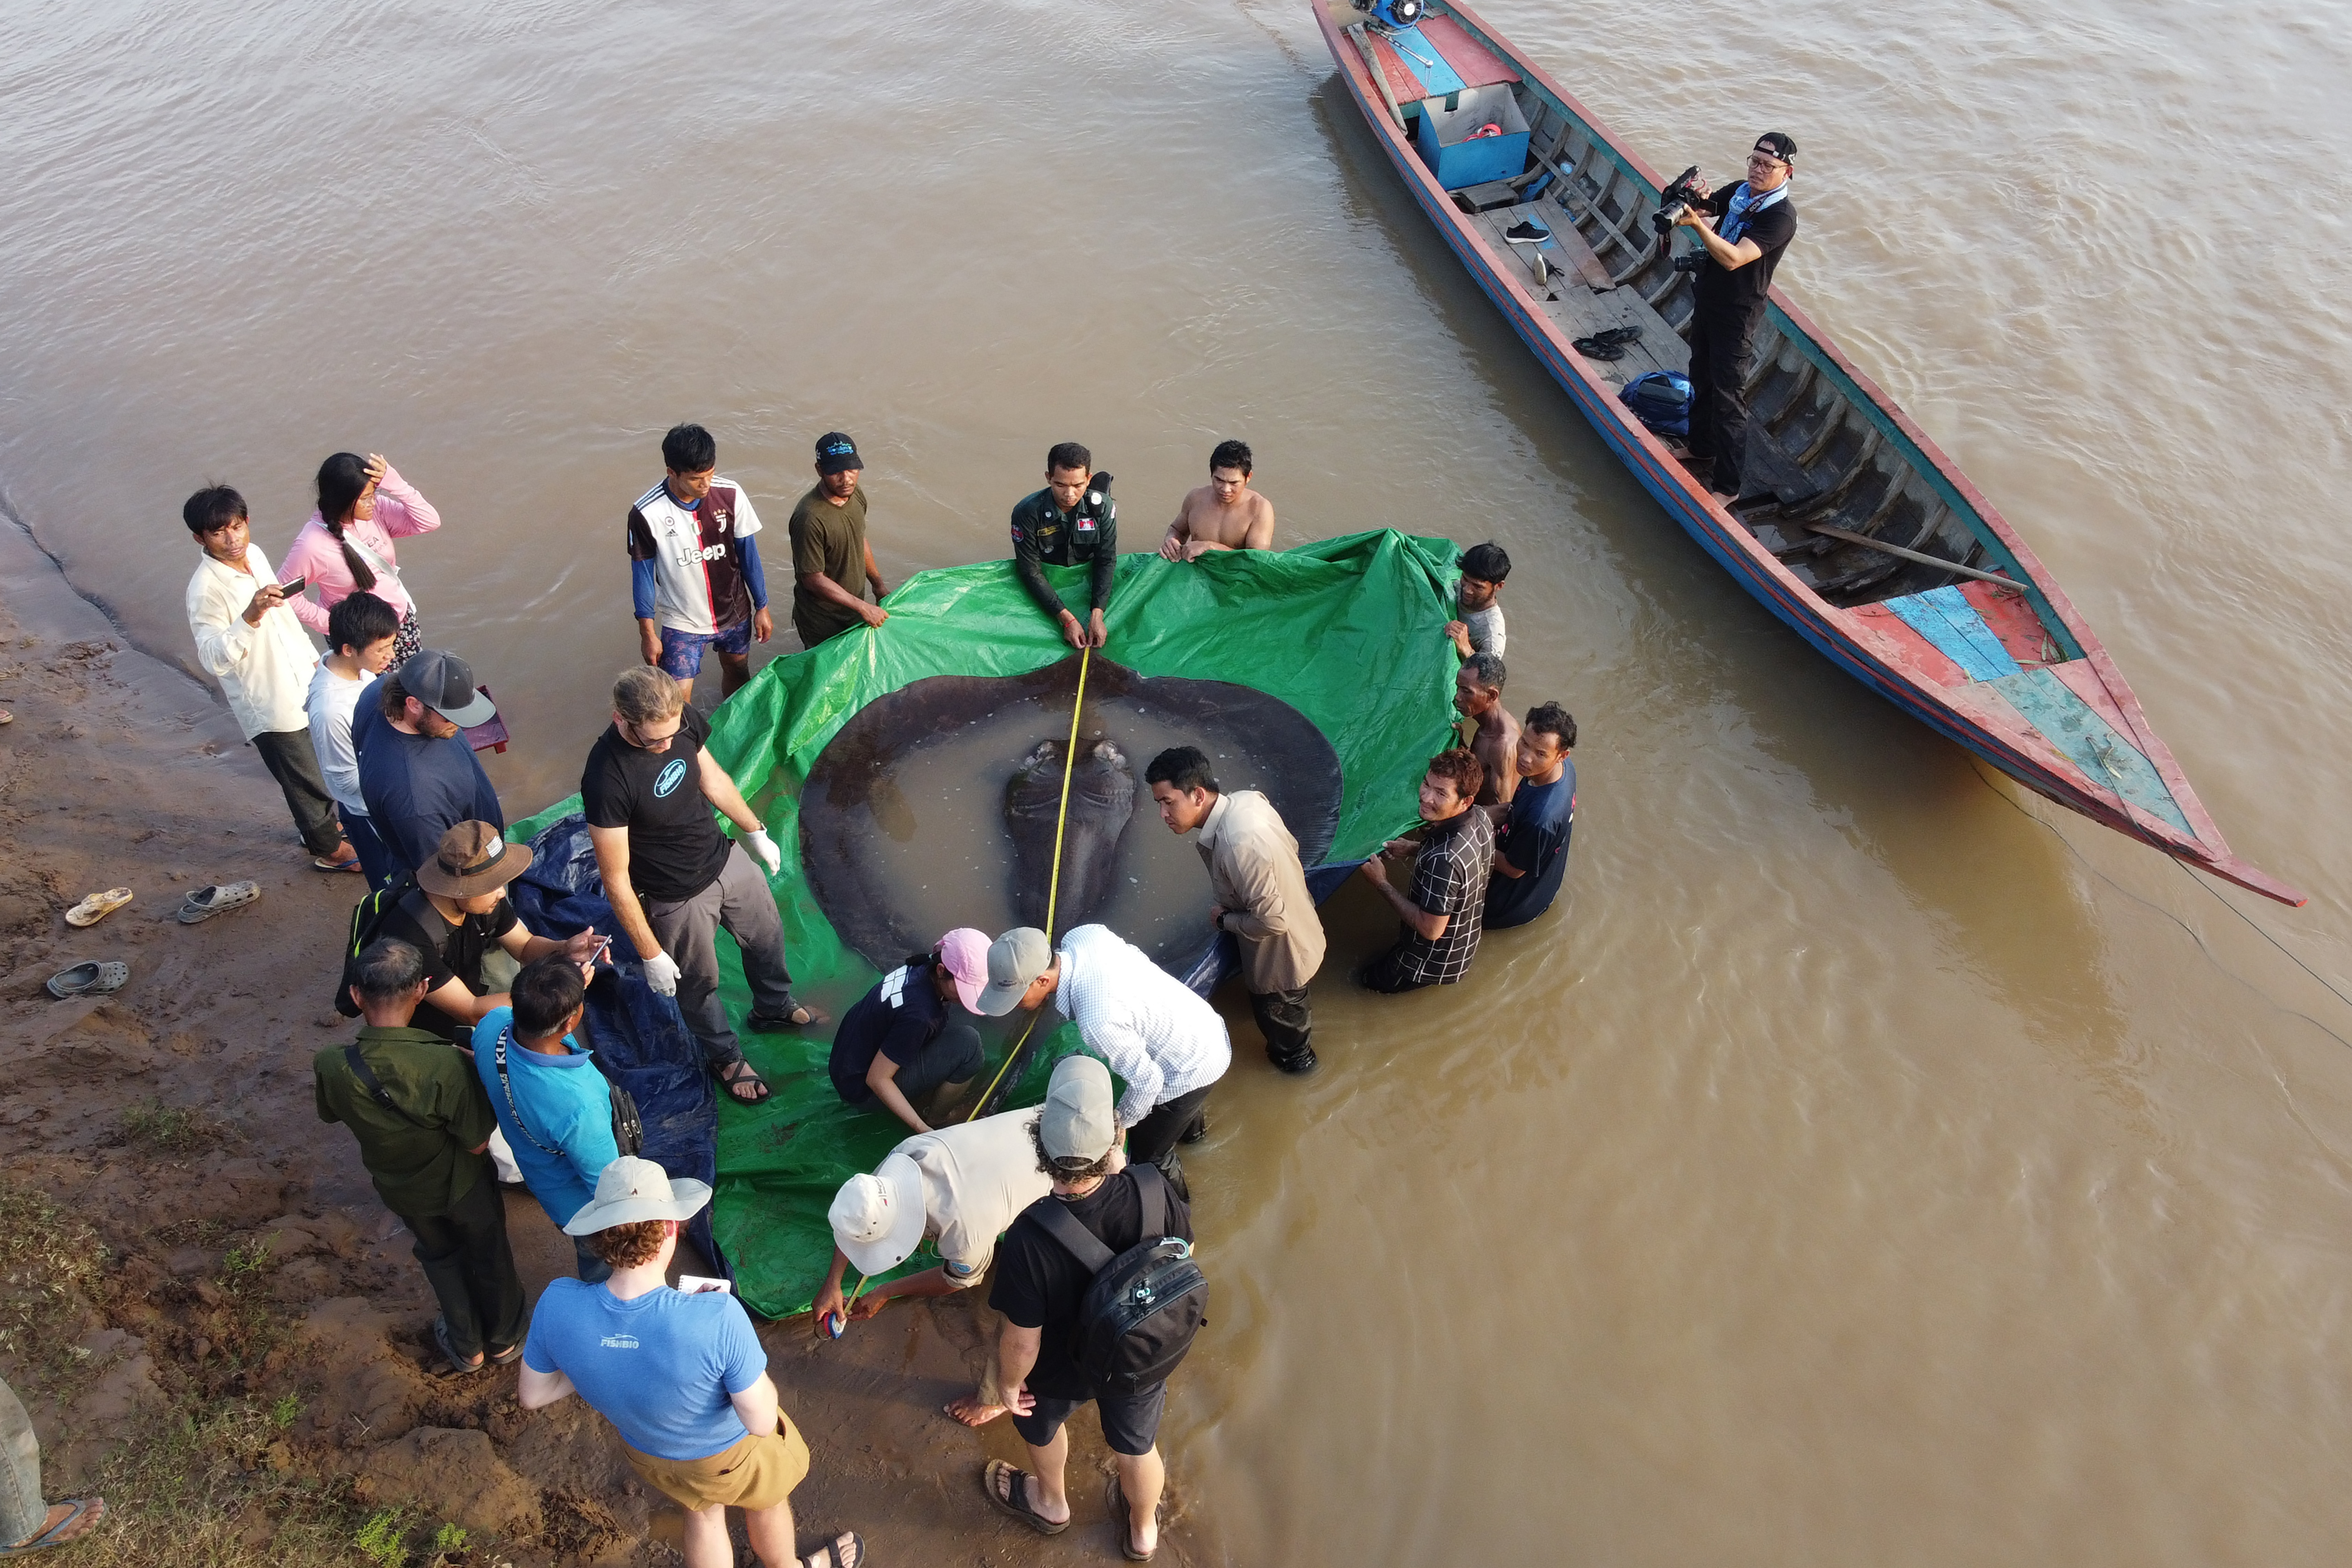 A team of Cambodian and American scientists and researchers, along with Fisheries Administration officials, measure the length of a giant freshwater stingray from snout to tail before being released back into the Mekong River in the north-eastern province of Stung Treng, Cambodia 